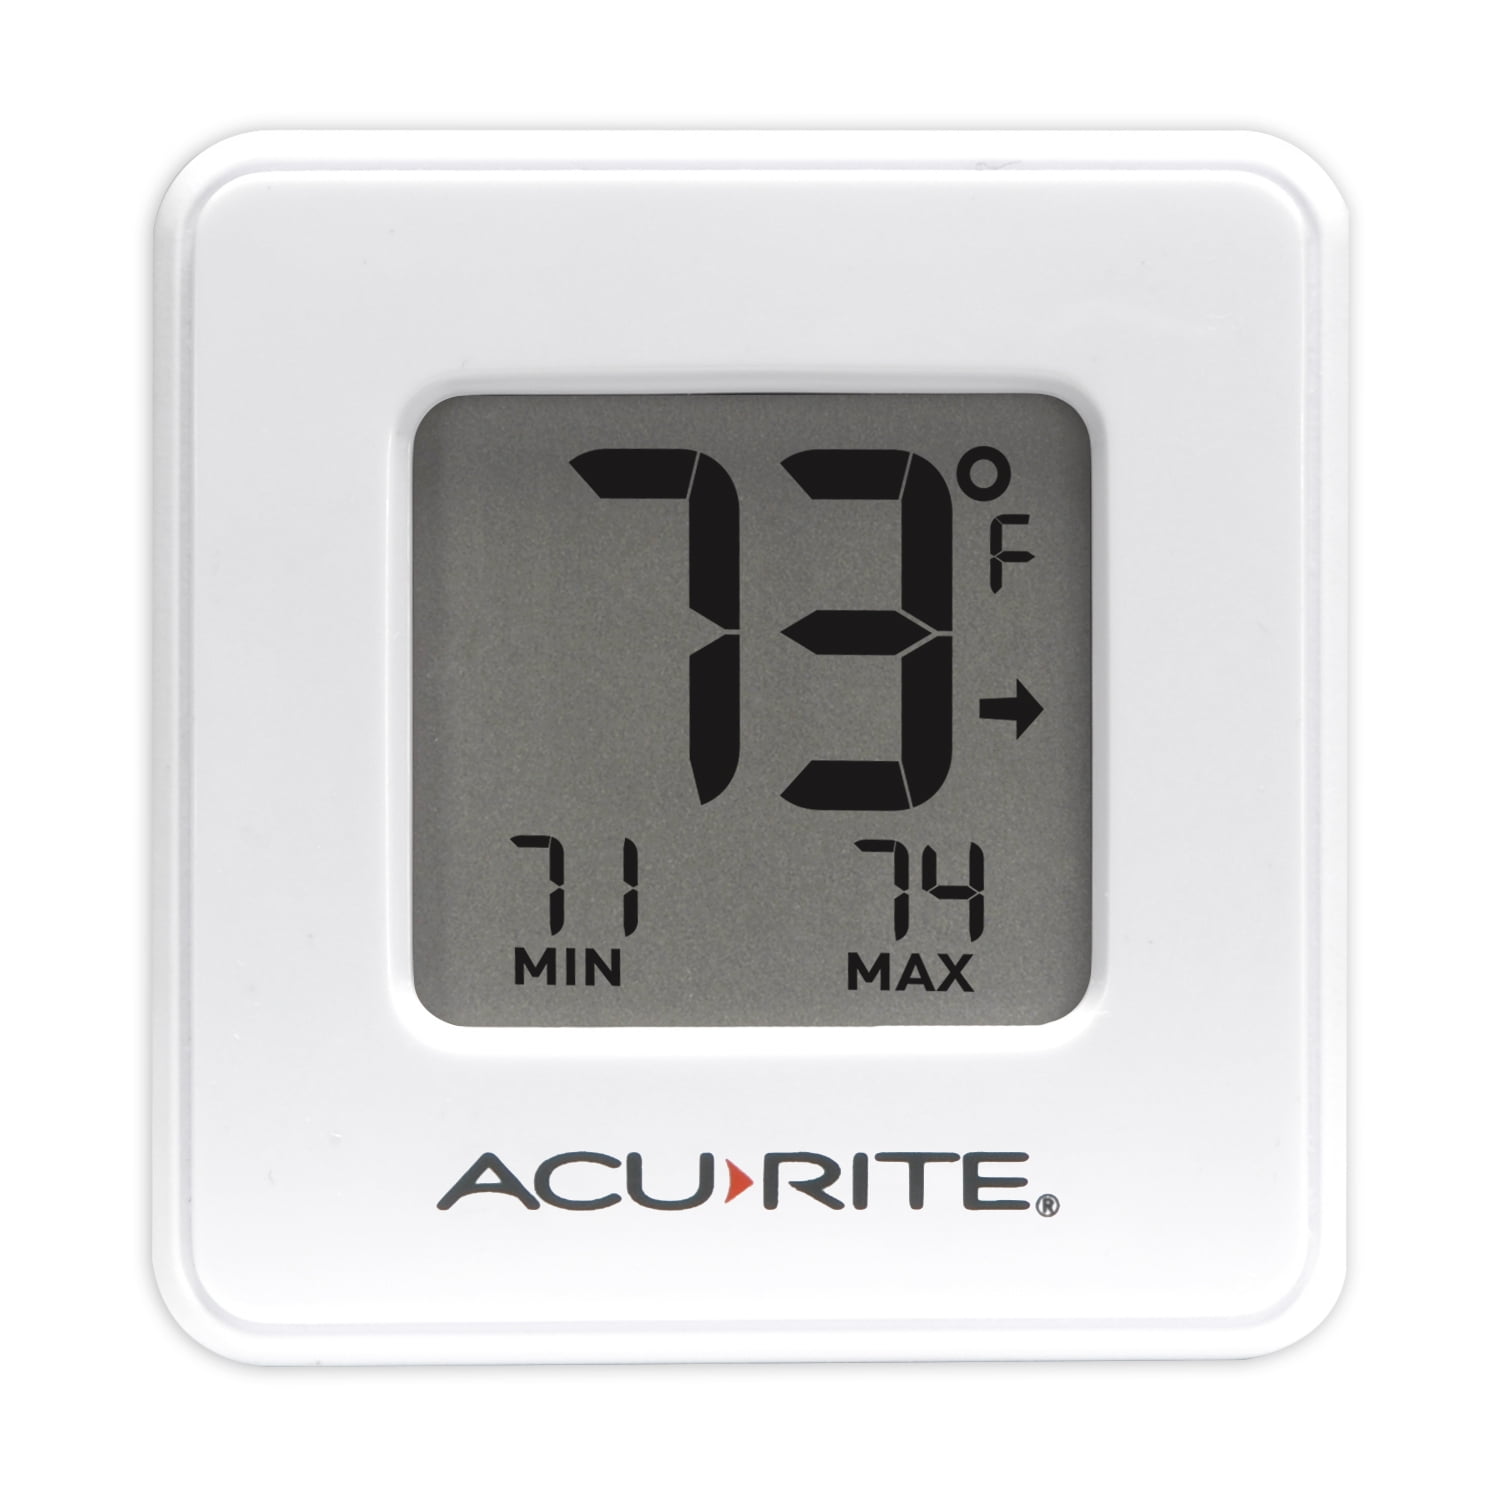 Acurite White Digital Indoor Thermometer with Compact Display (1 x 3.75 x 6.25)